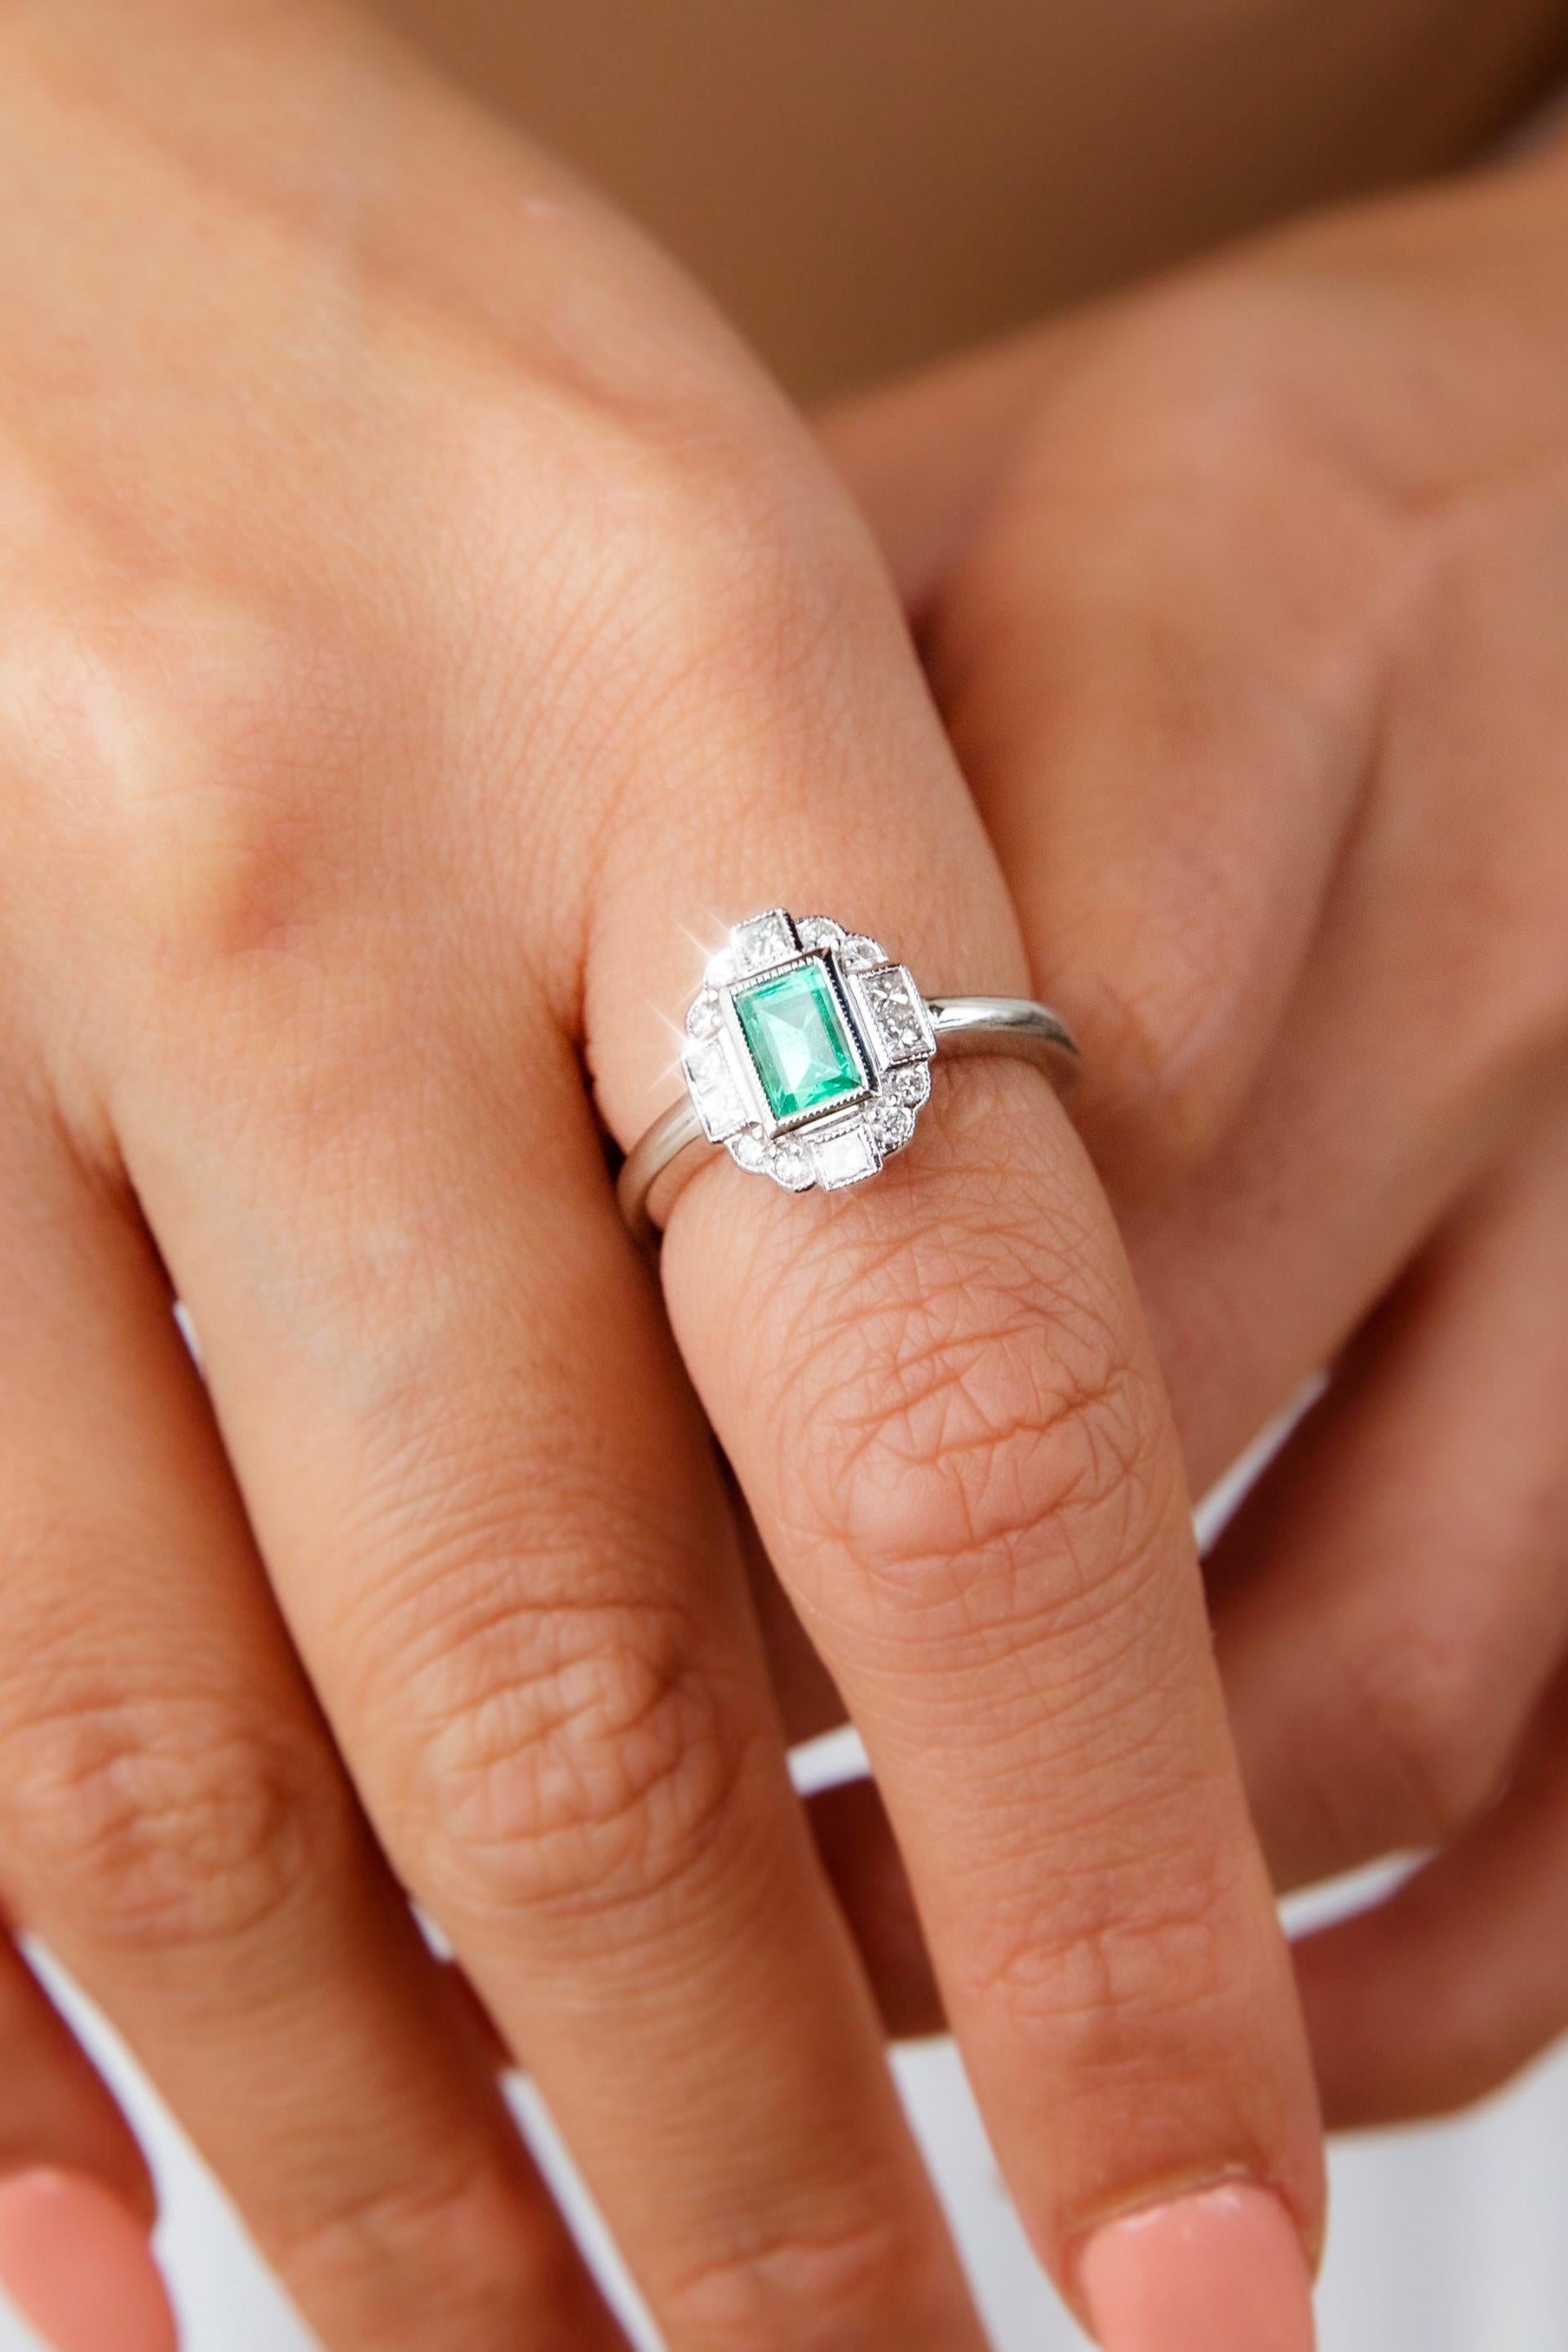 Lovingly forged in 18 carat white gold, this enchanting art deco inspired contemporary ring features a lovely bright green emerald at the centre of a captivating millegrain border of shimmering princess cut and round brilliant cut diamonds. This